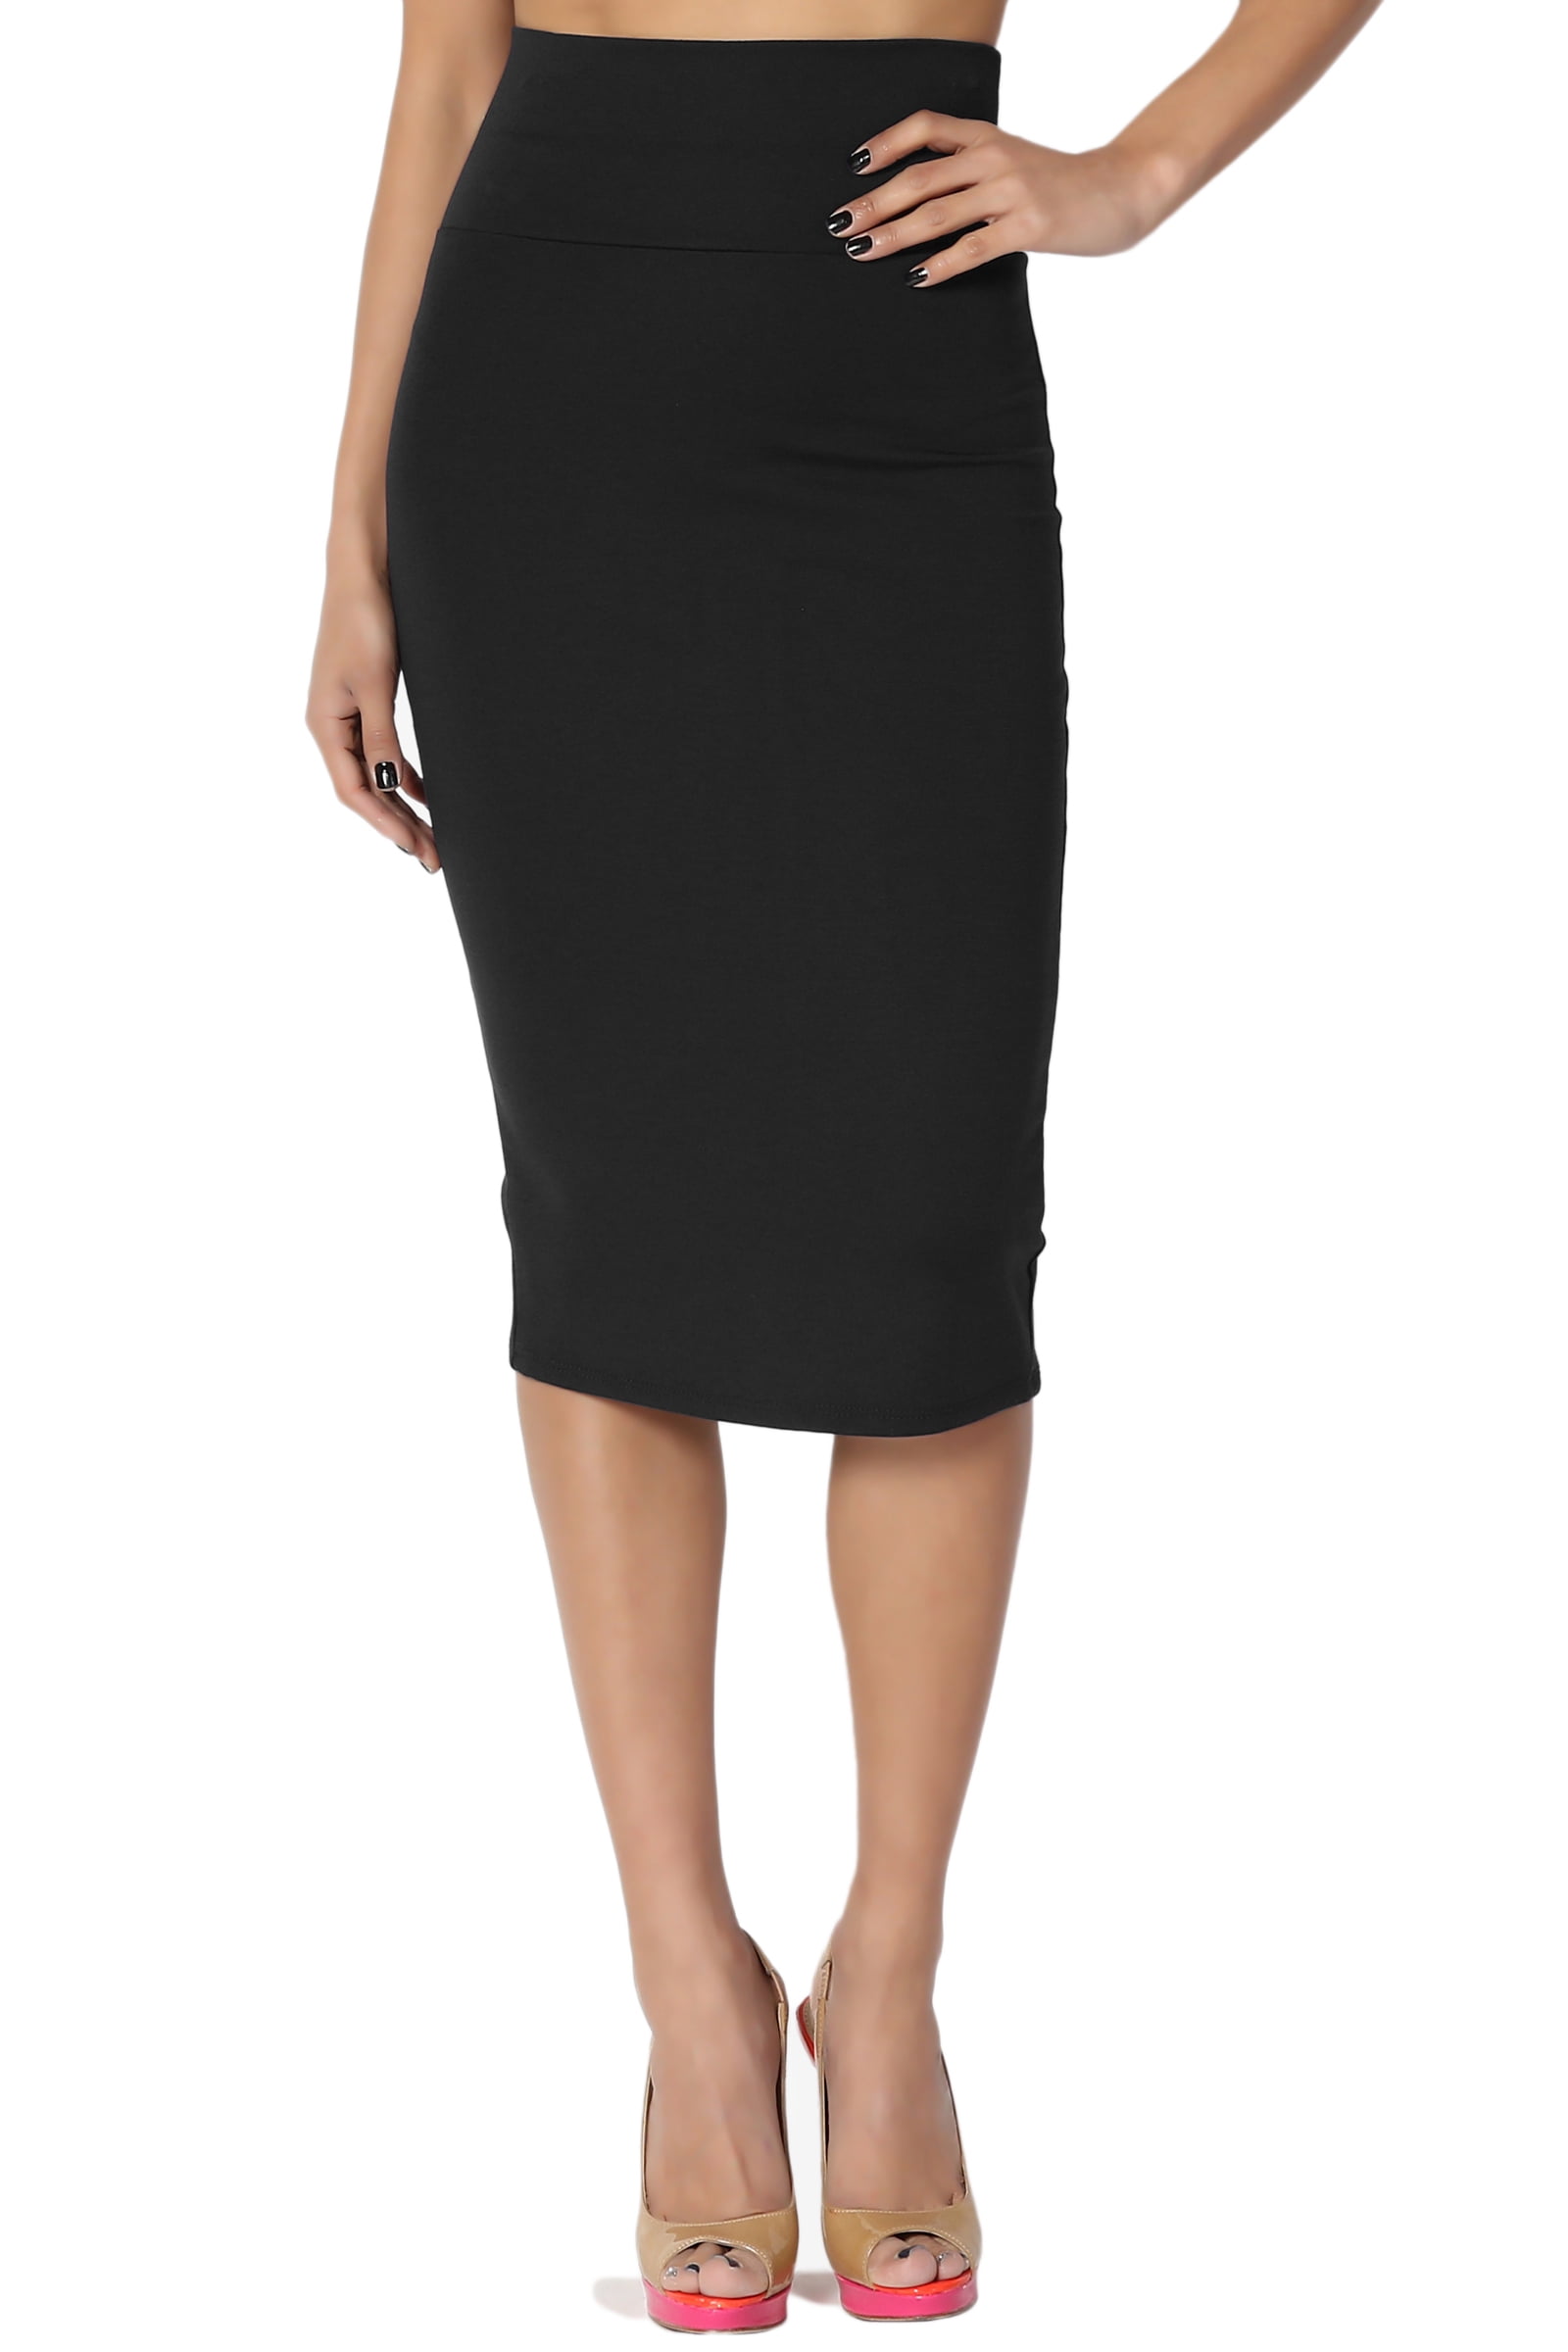 Oops Outlet Womens Elasticated High Waist Wiggle Bodycon Tube Pencil Midi Skirt